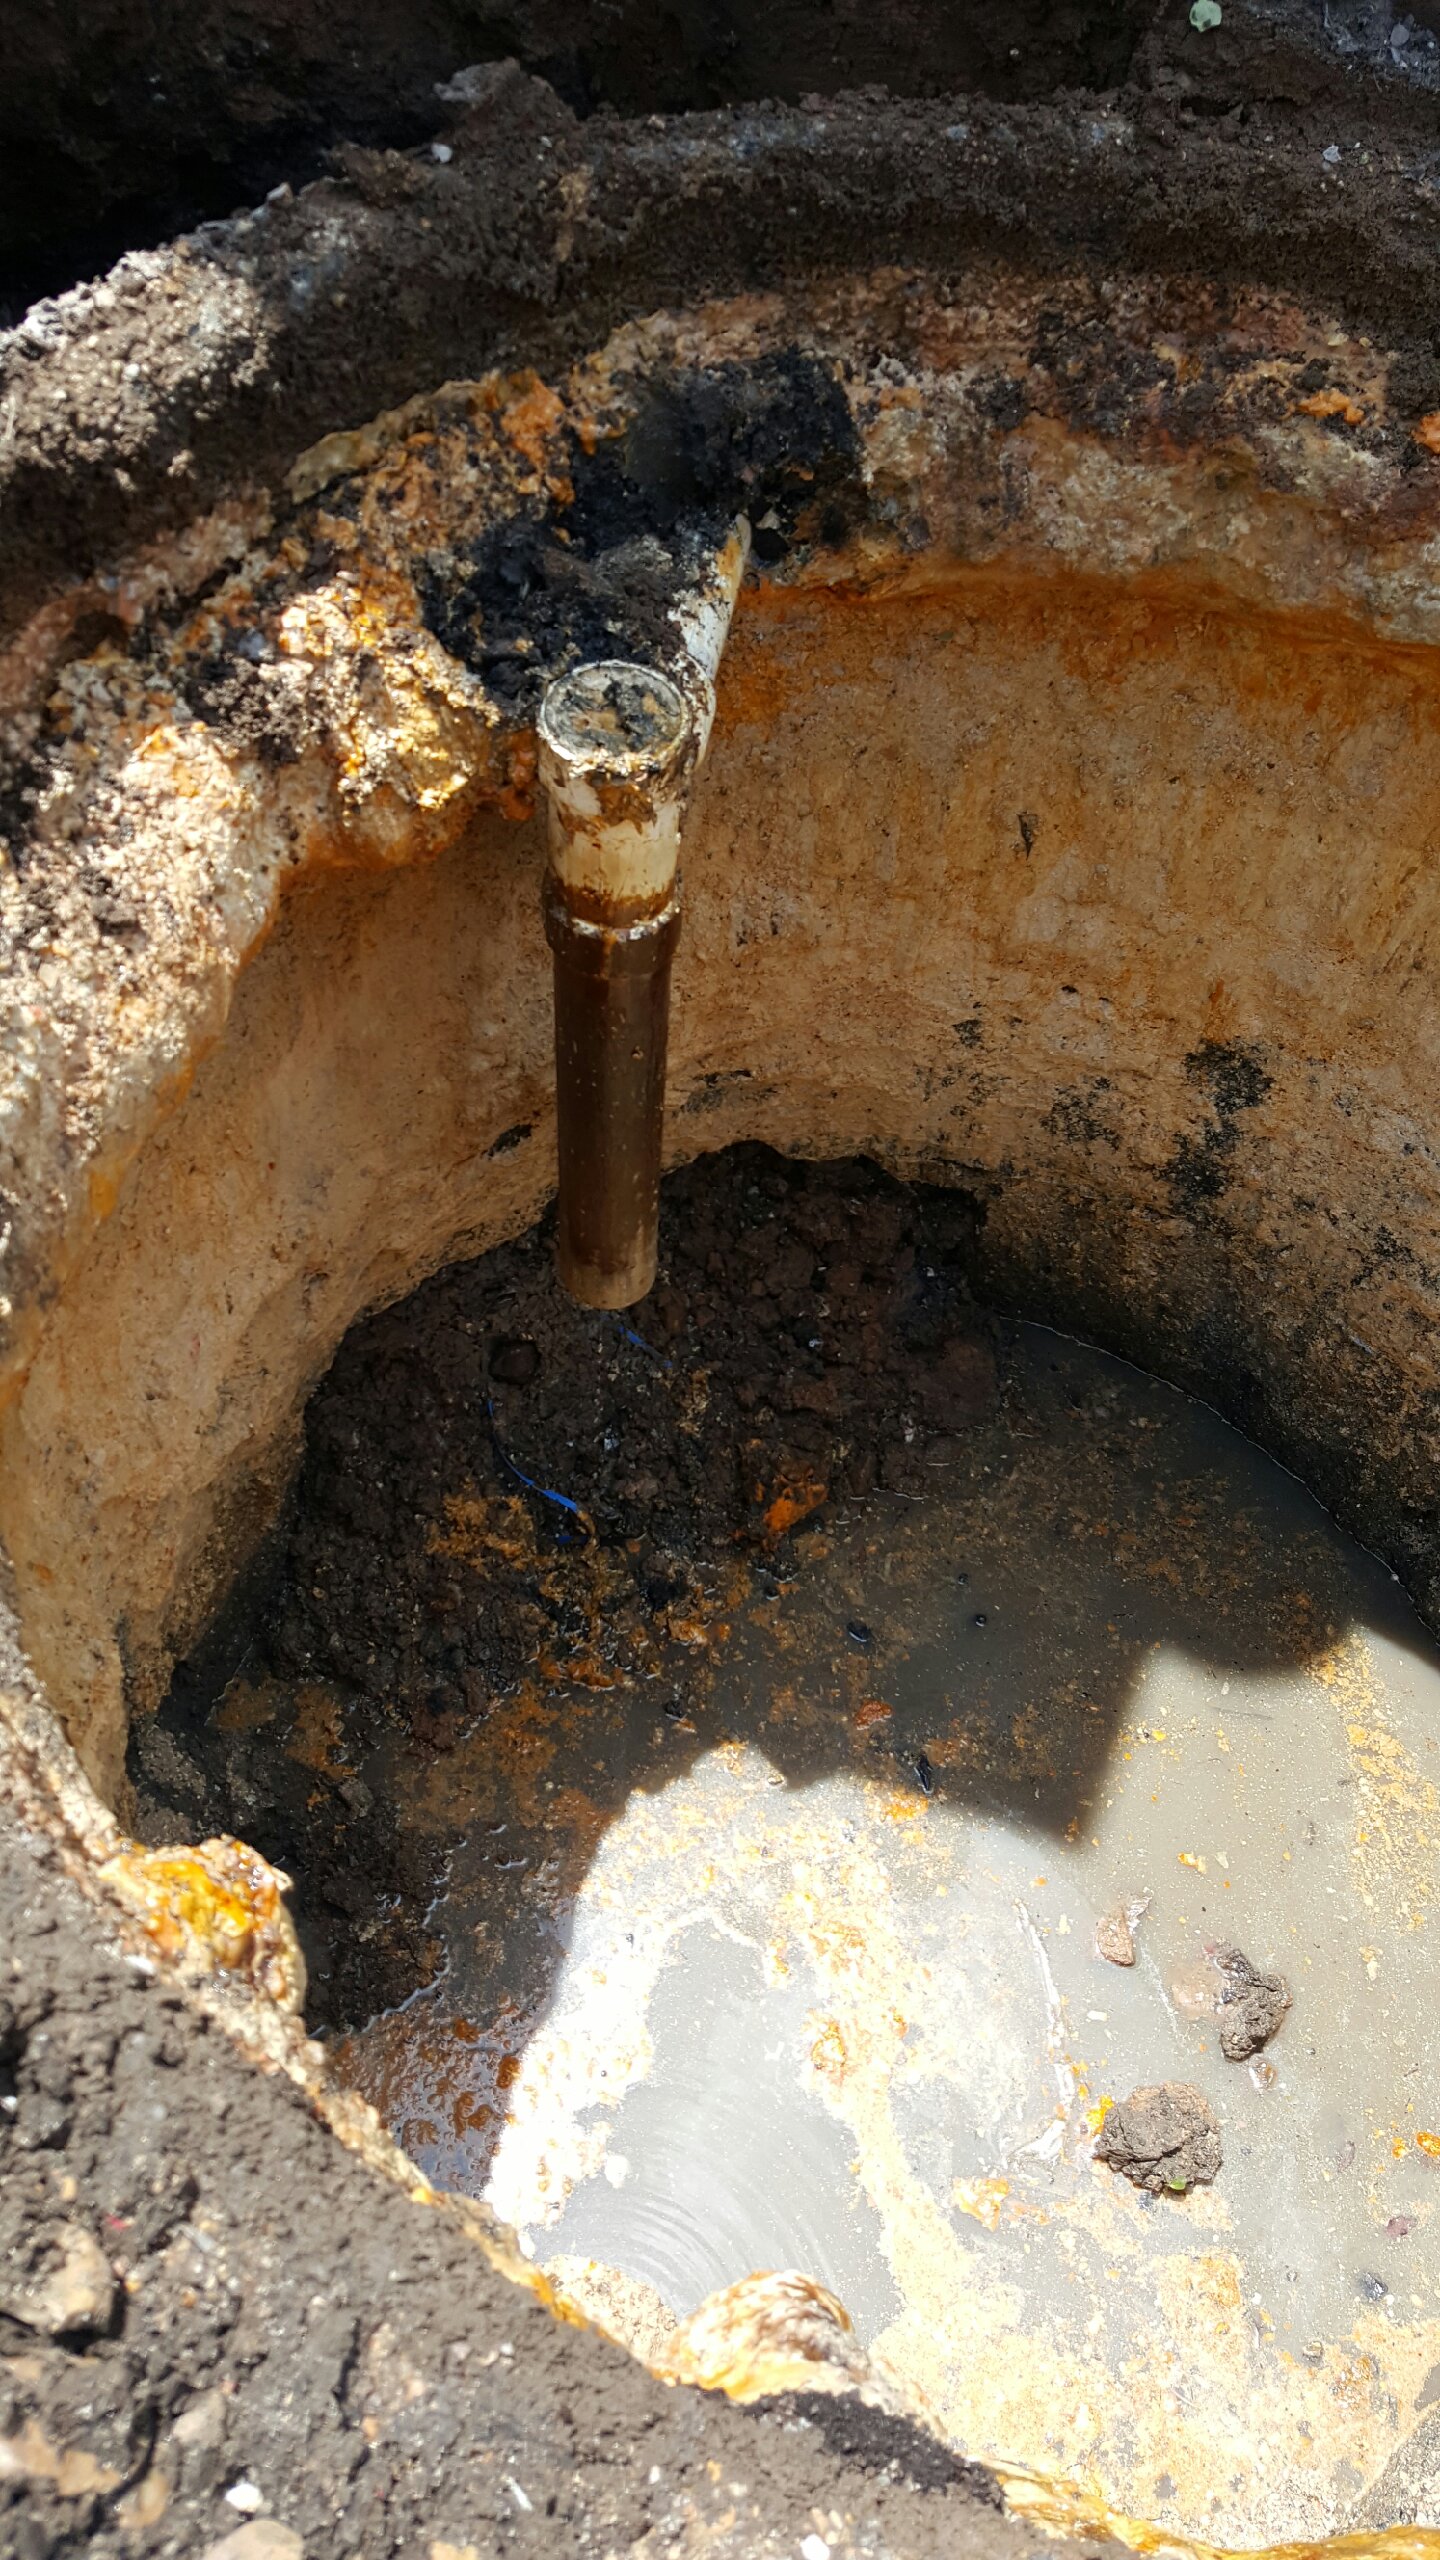 Bottom of the Old Grease Trap